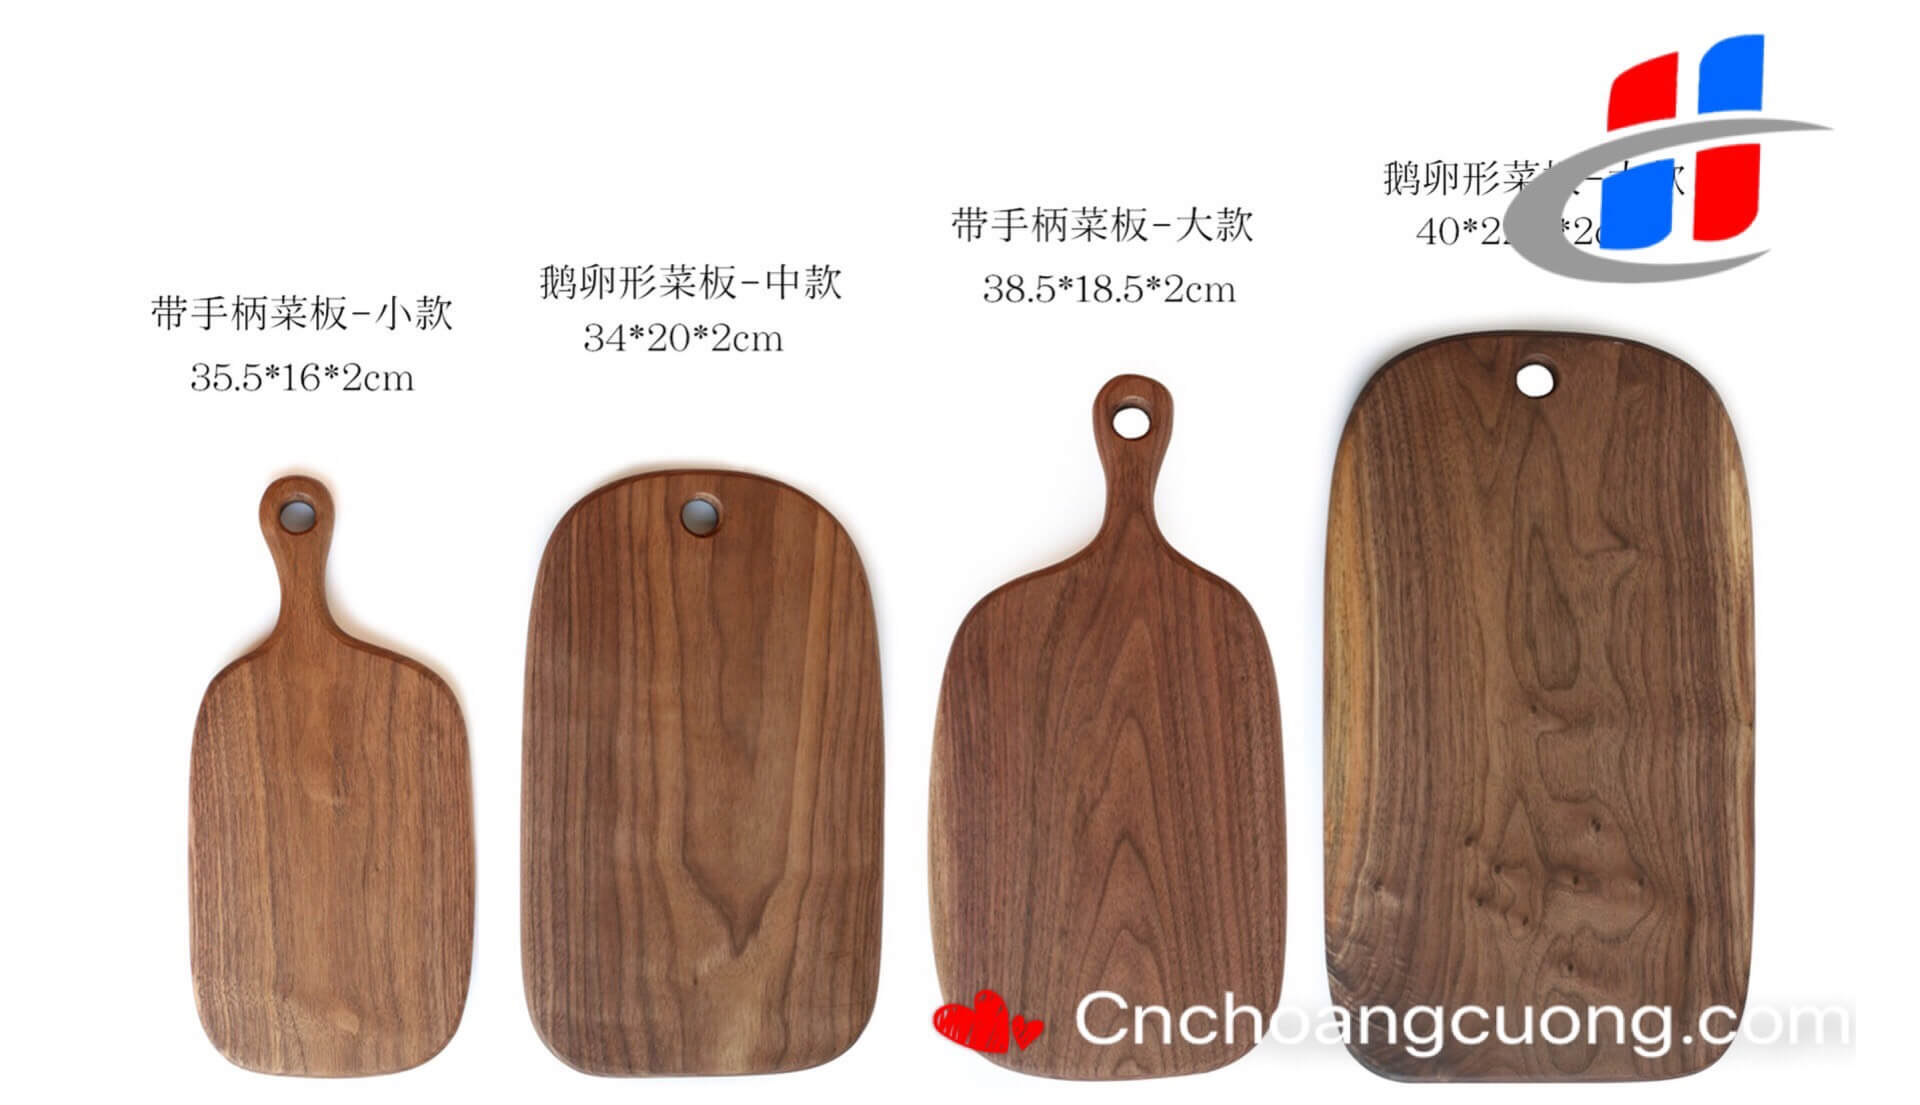 https://cnchoangcuong.com/?post_type=product&p=2122&preview=true